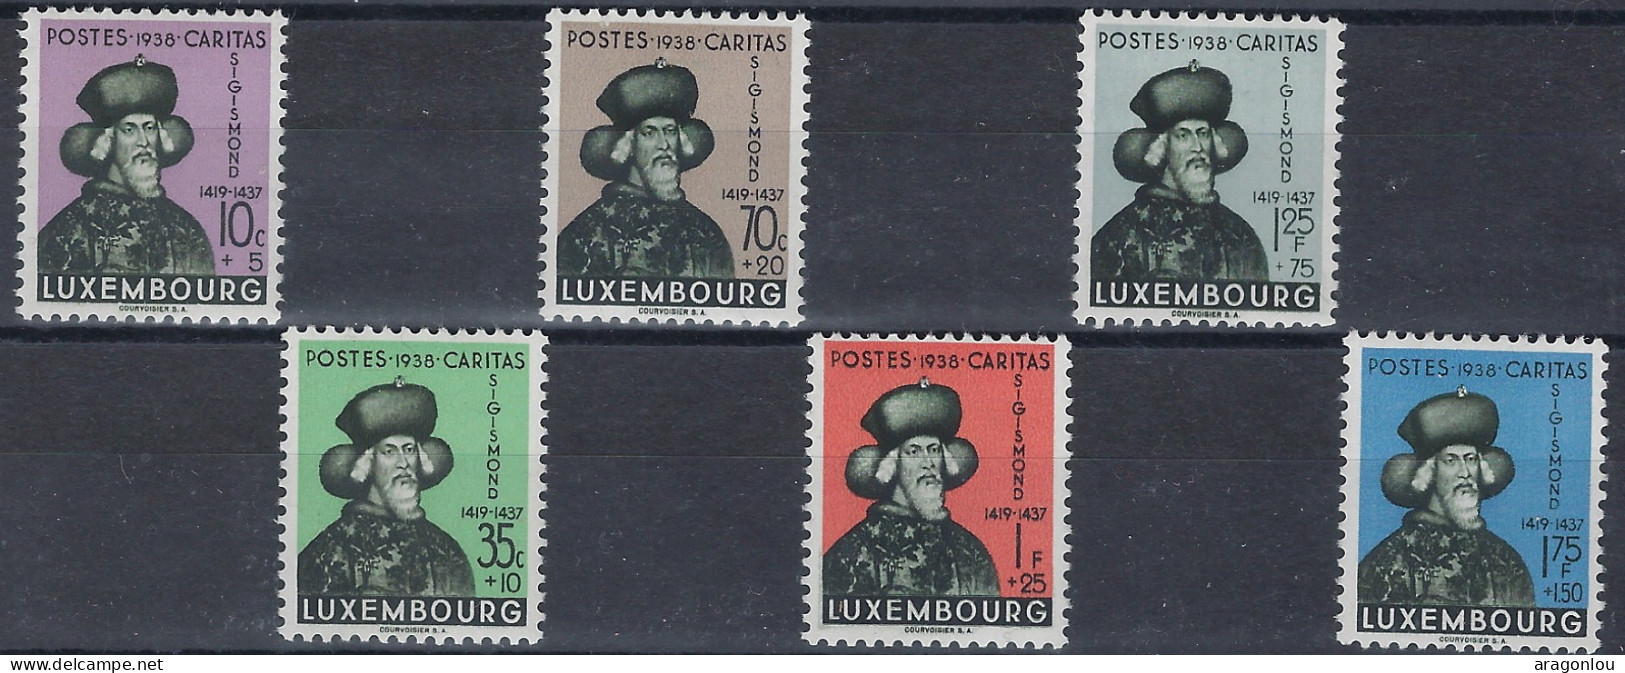 Luxembourg - Luxemburg - Timbres - Sigismund  1938  Série  * - Usati